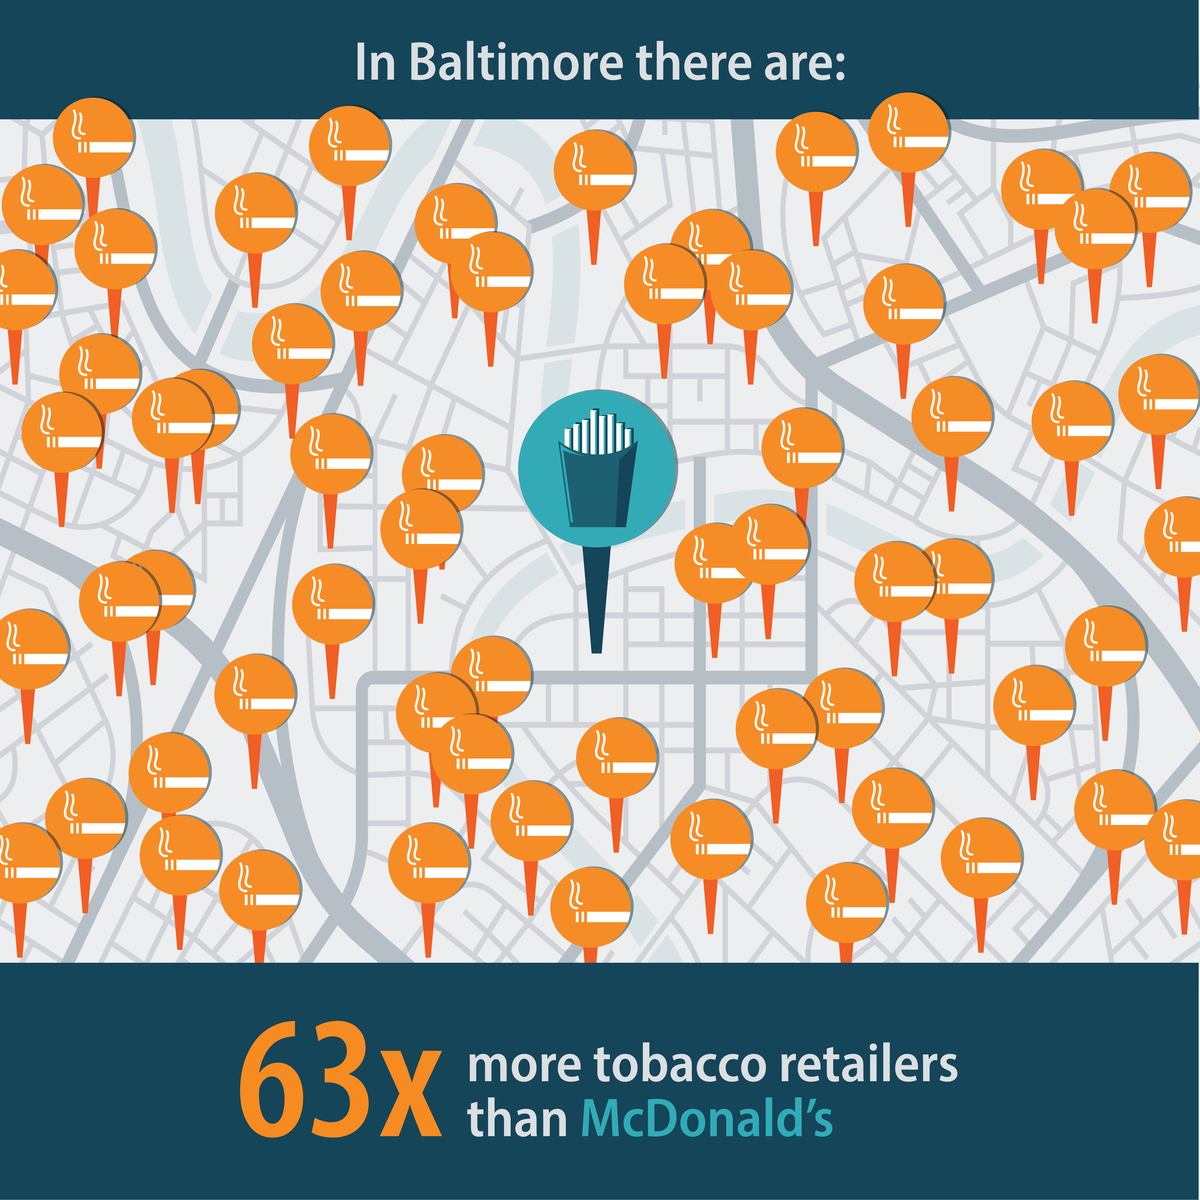 In Baltimore there are: 63 times more tobacco retailers than McDonald's